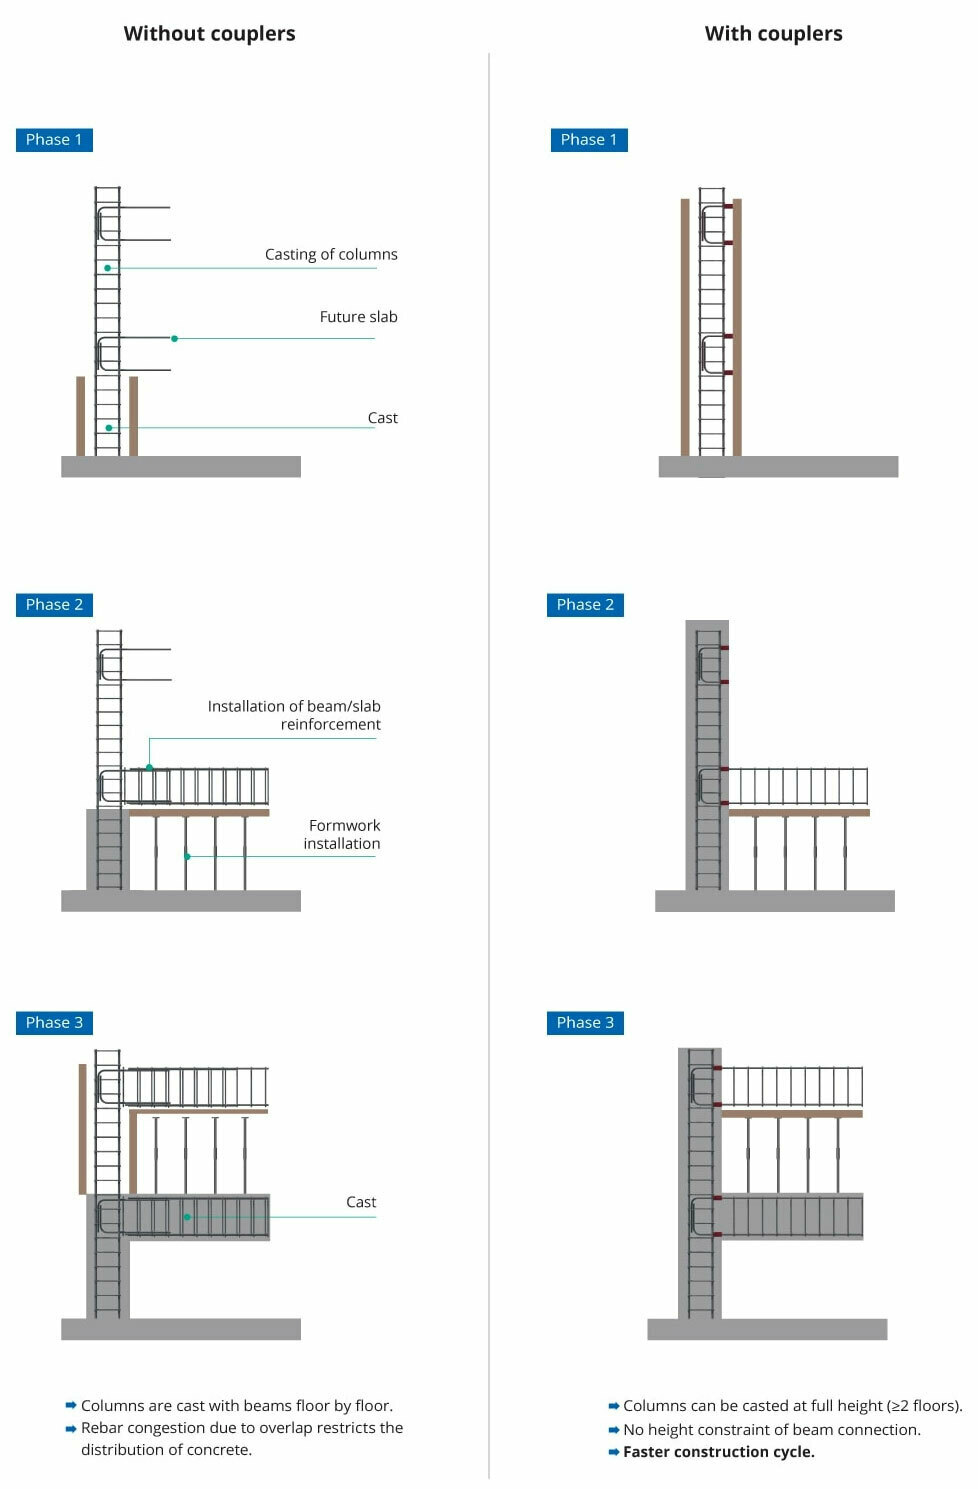 Rebar Applications for Column-Beam Connections